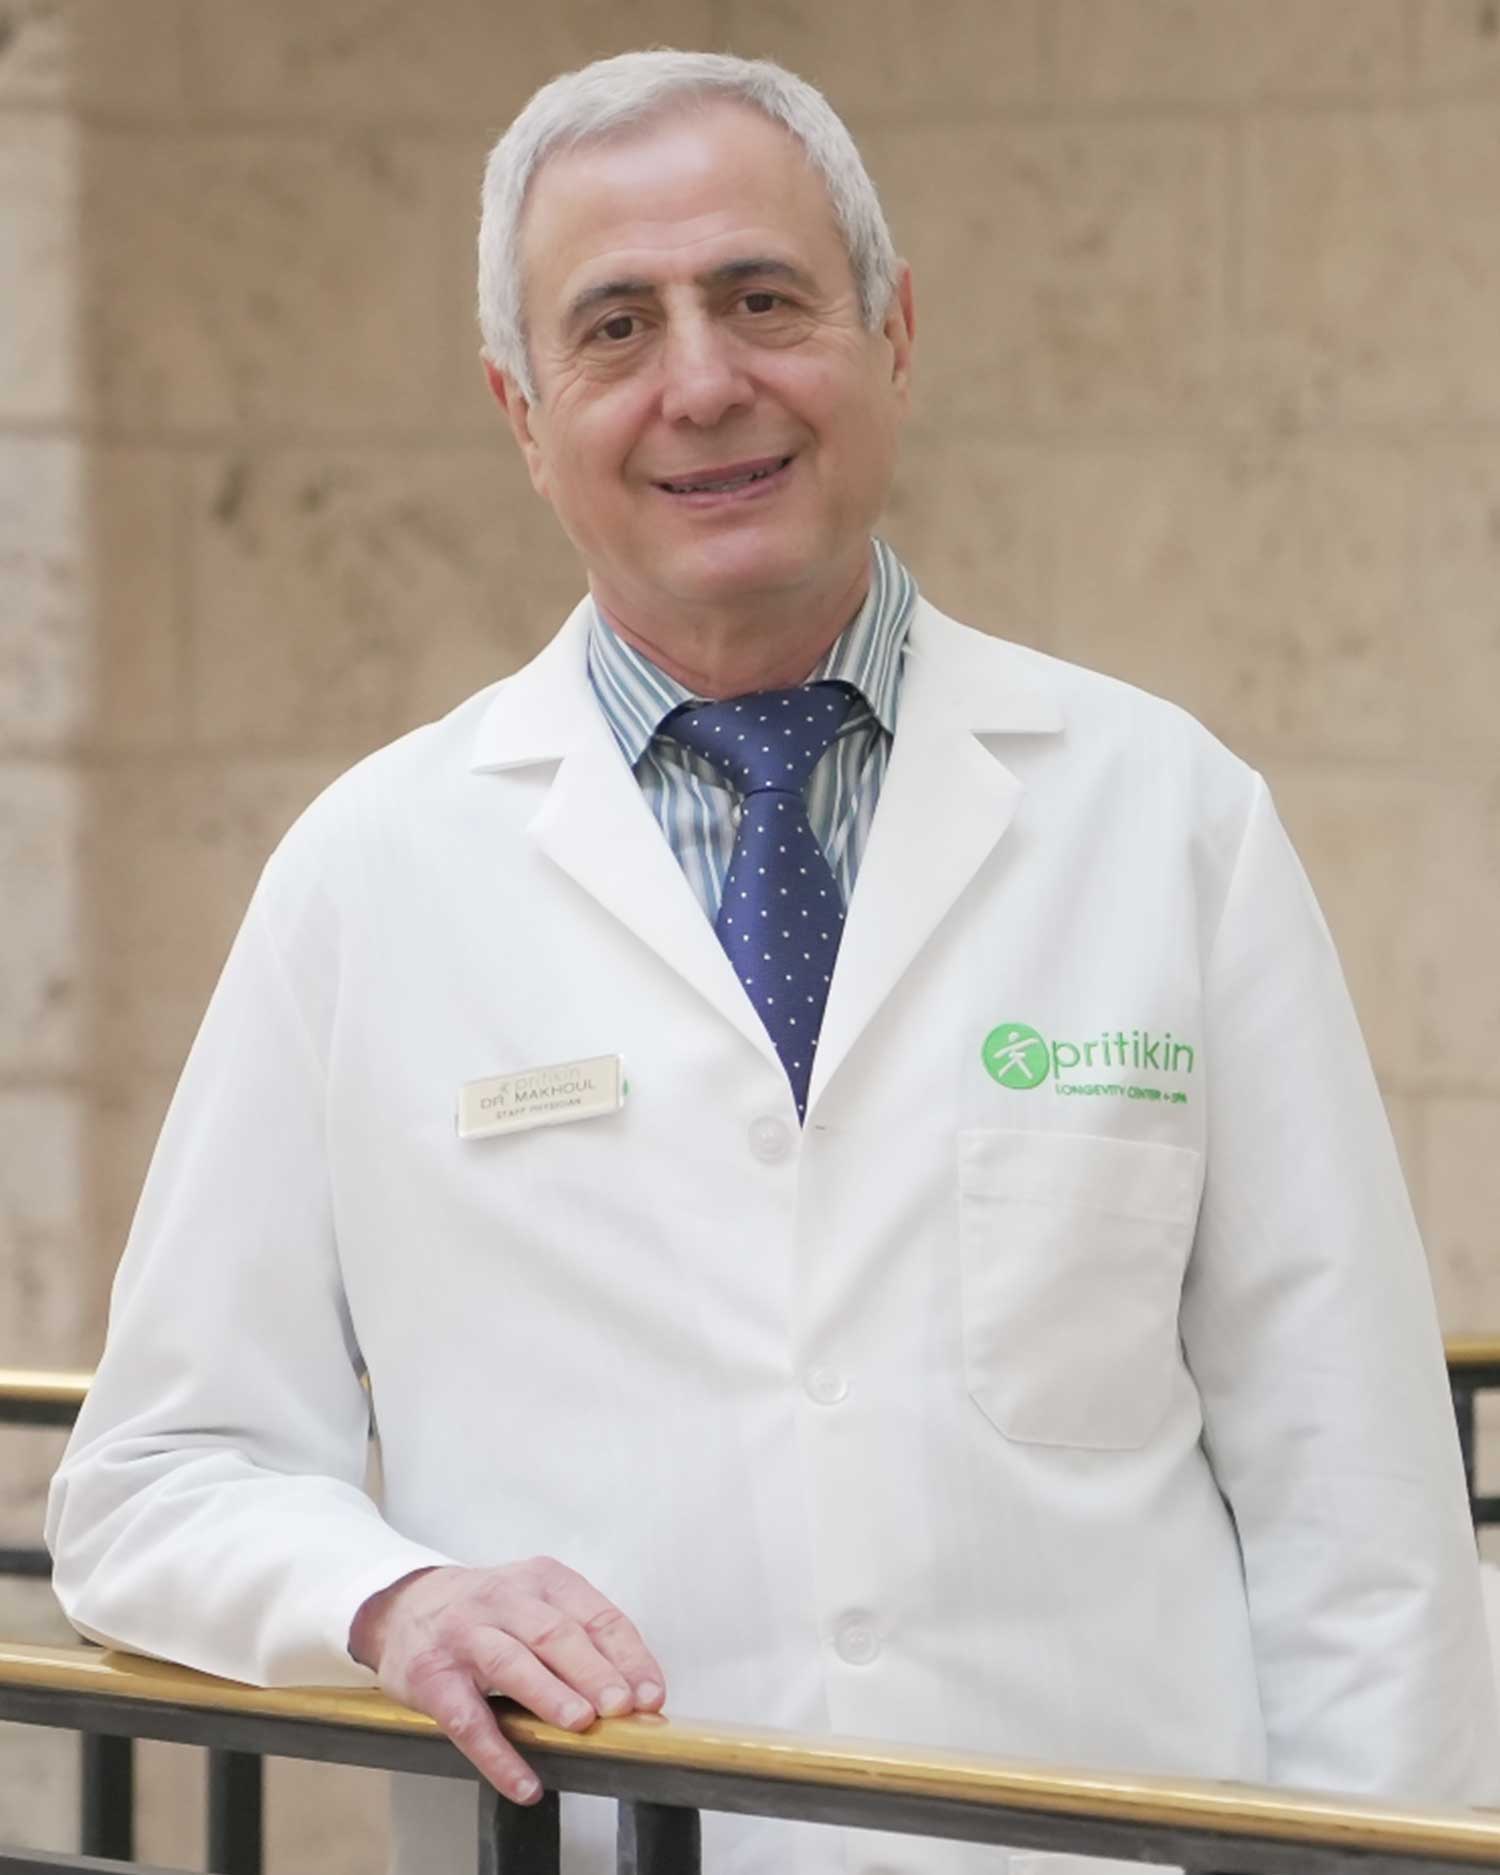 Nidal Makhoul, MD, FACC | Cardiologist & Educator at the Pritikin Center